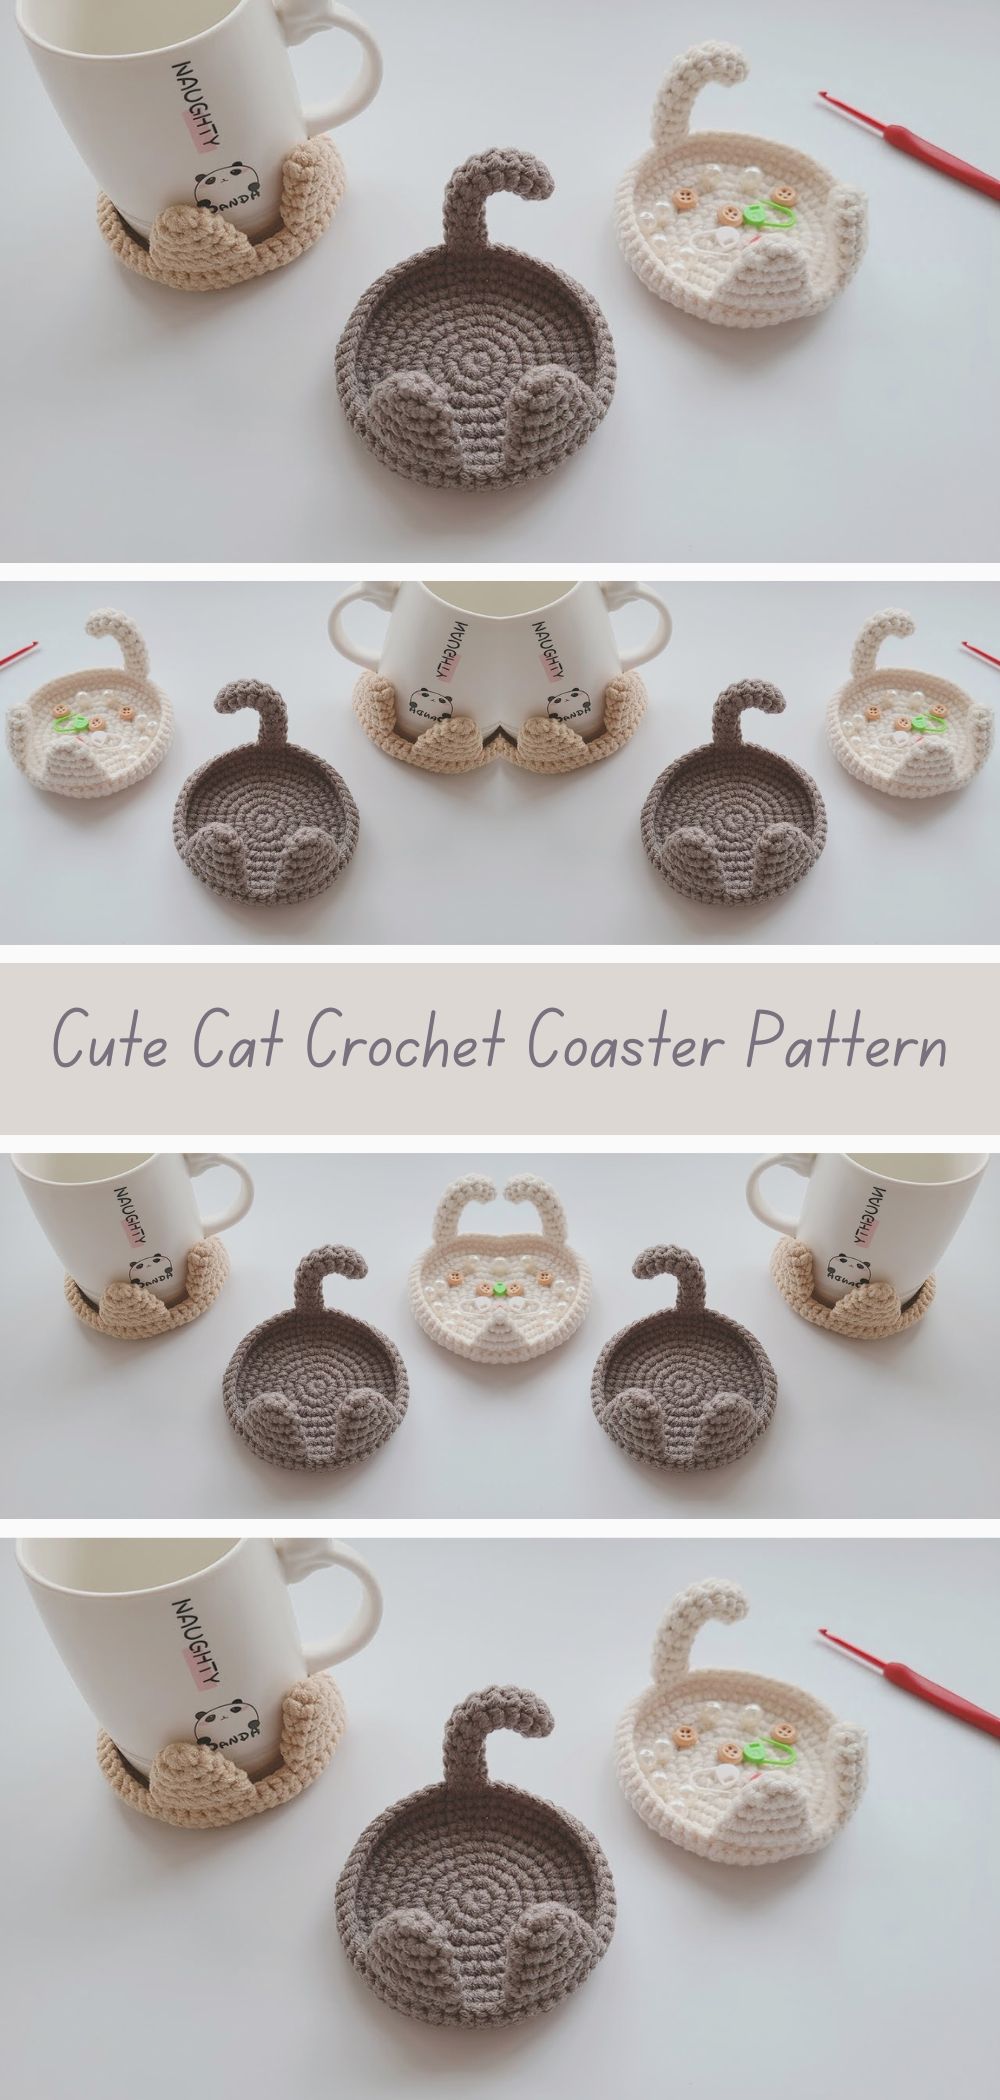 Cute Cat Crochet Coaster Pattern - Create adorable cat-shaped coasters with this charming crochet pattern"